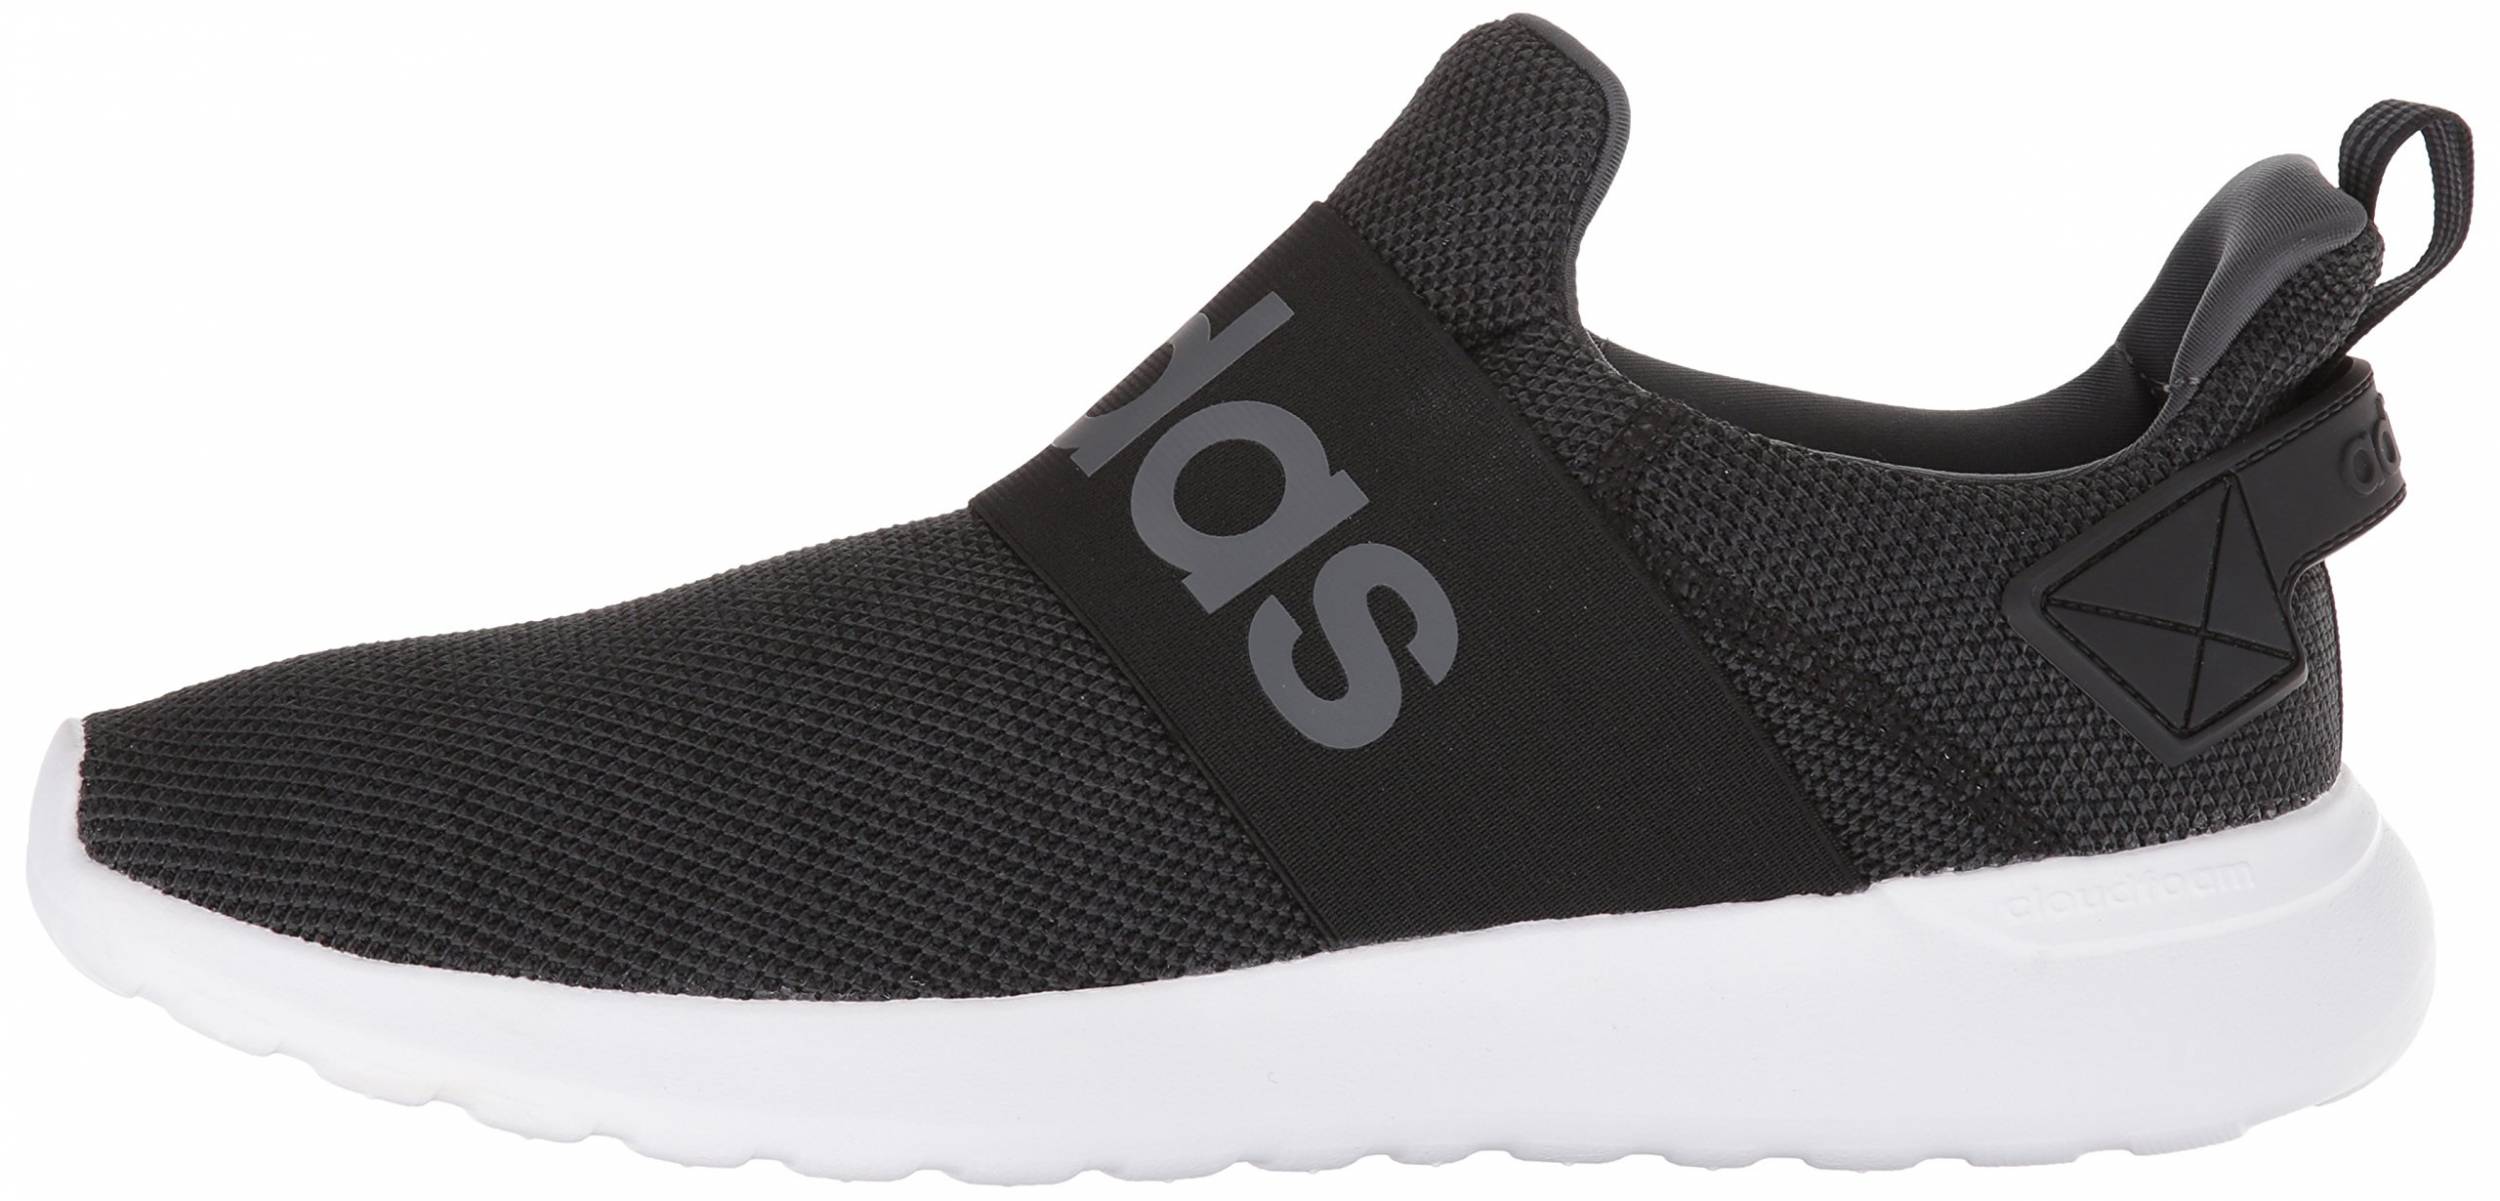 Ideally mainly morphine Adidas Lite Racer Adapt sneakers in 6 colors (only $23) | RunRepeat